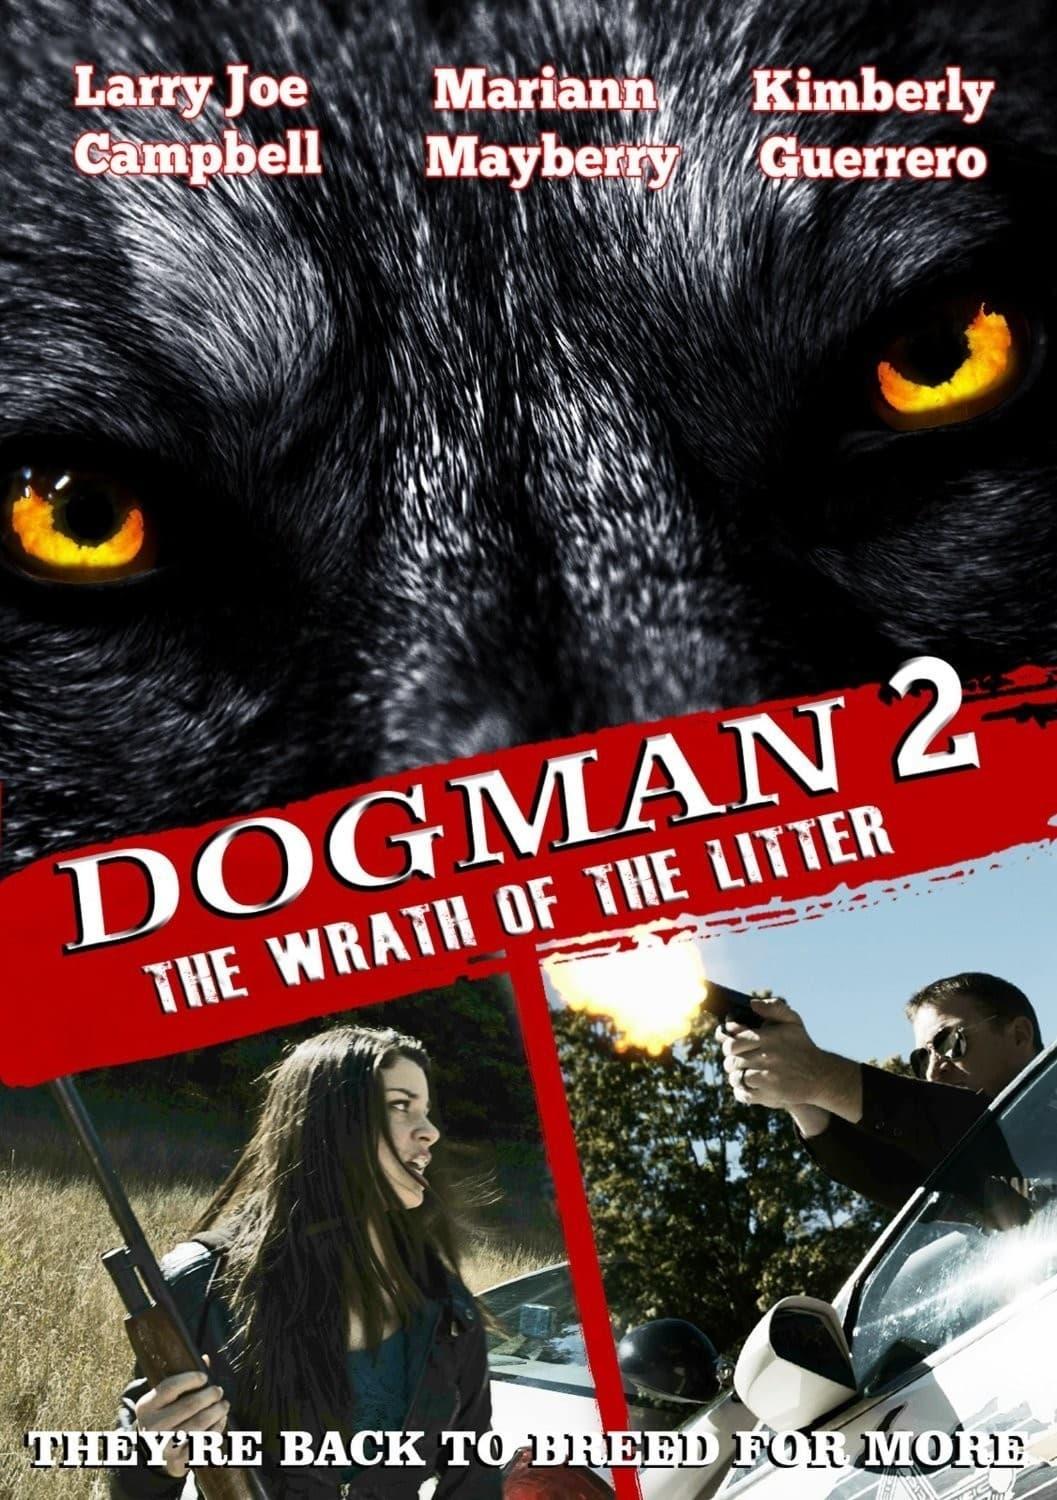 Dogman 2: The Wrath of the Litter poster